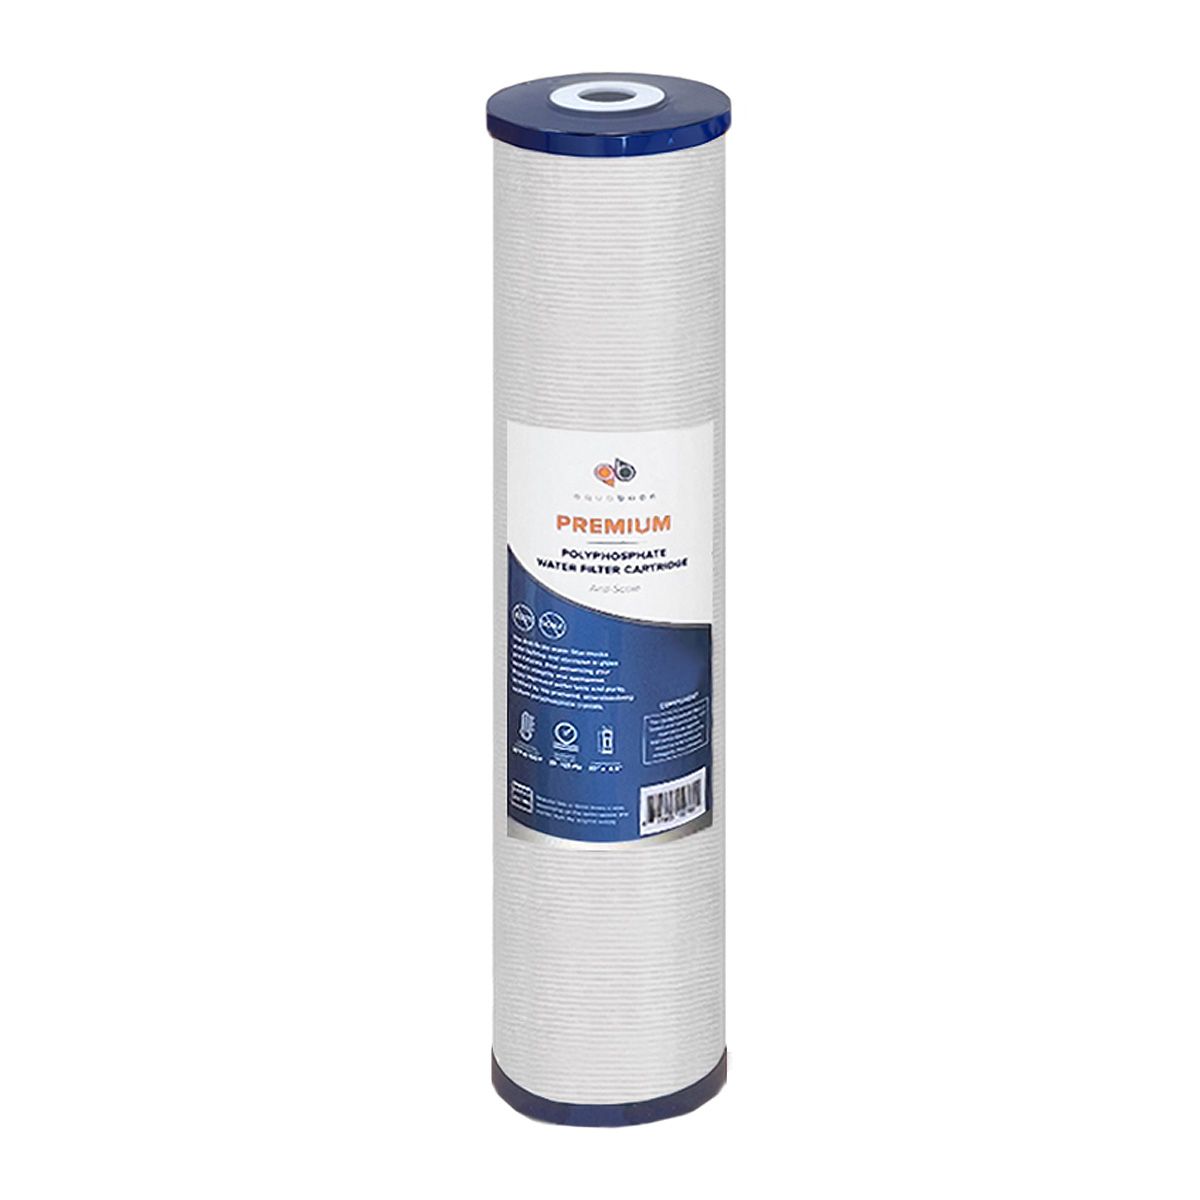 Whole House 20 x 4.5 Inch. Big Blue Polyphosphate Anti Scale Water Filter Cartridge